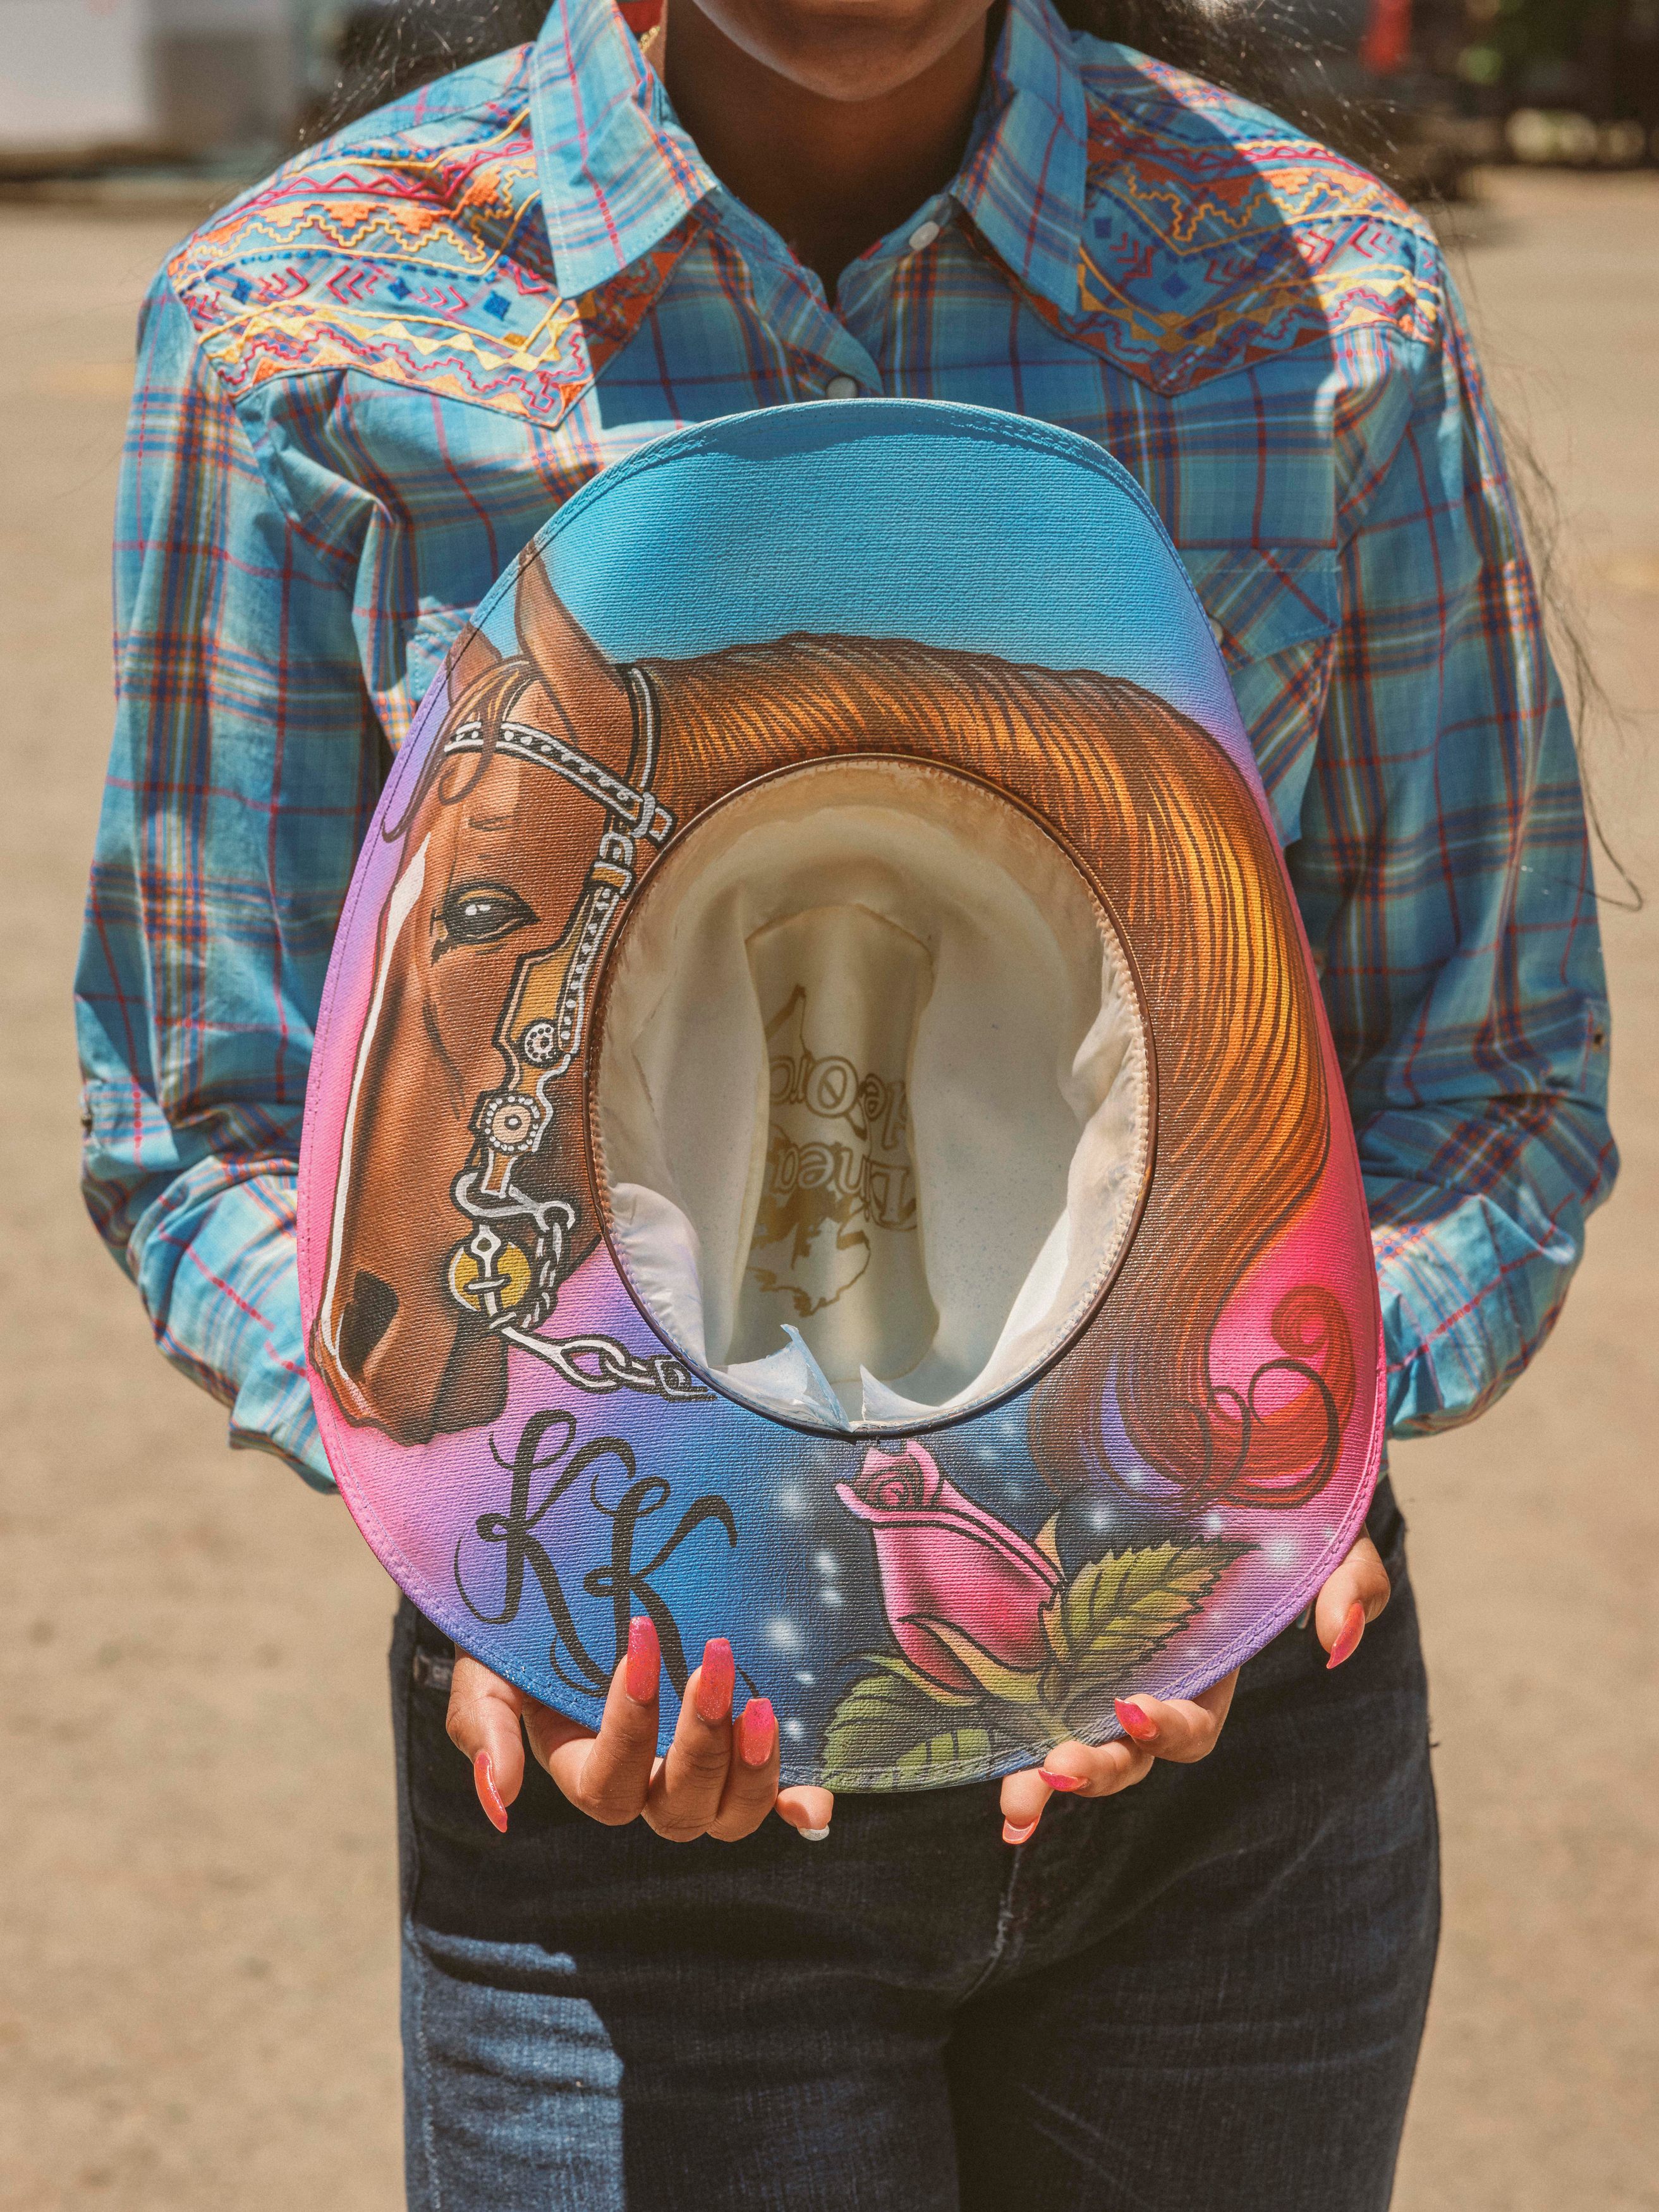 Barrel racer Kysariah Brinson's hat features a drawing of her horse, Chad, in 2019. “My mom actually drew Chad out and took the hat to a tattoo shop in downtown Oakland to get it airbrushed,” she said.